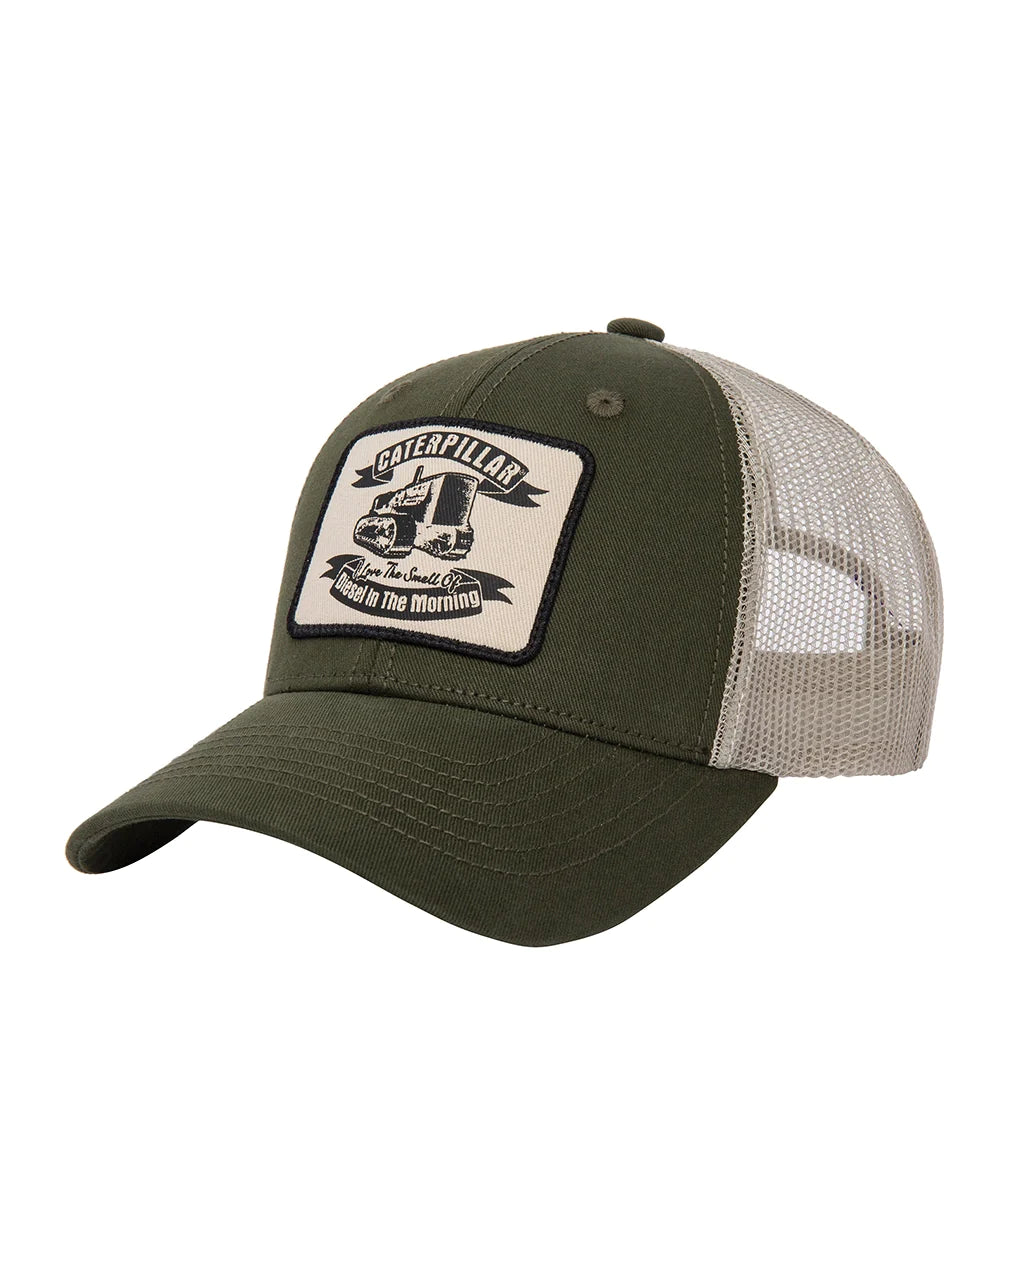 Diesel in The Morning Cap - Army Moss